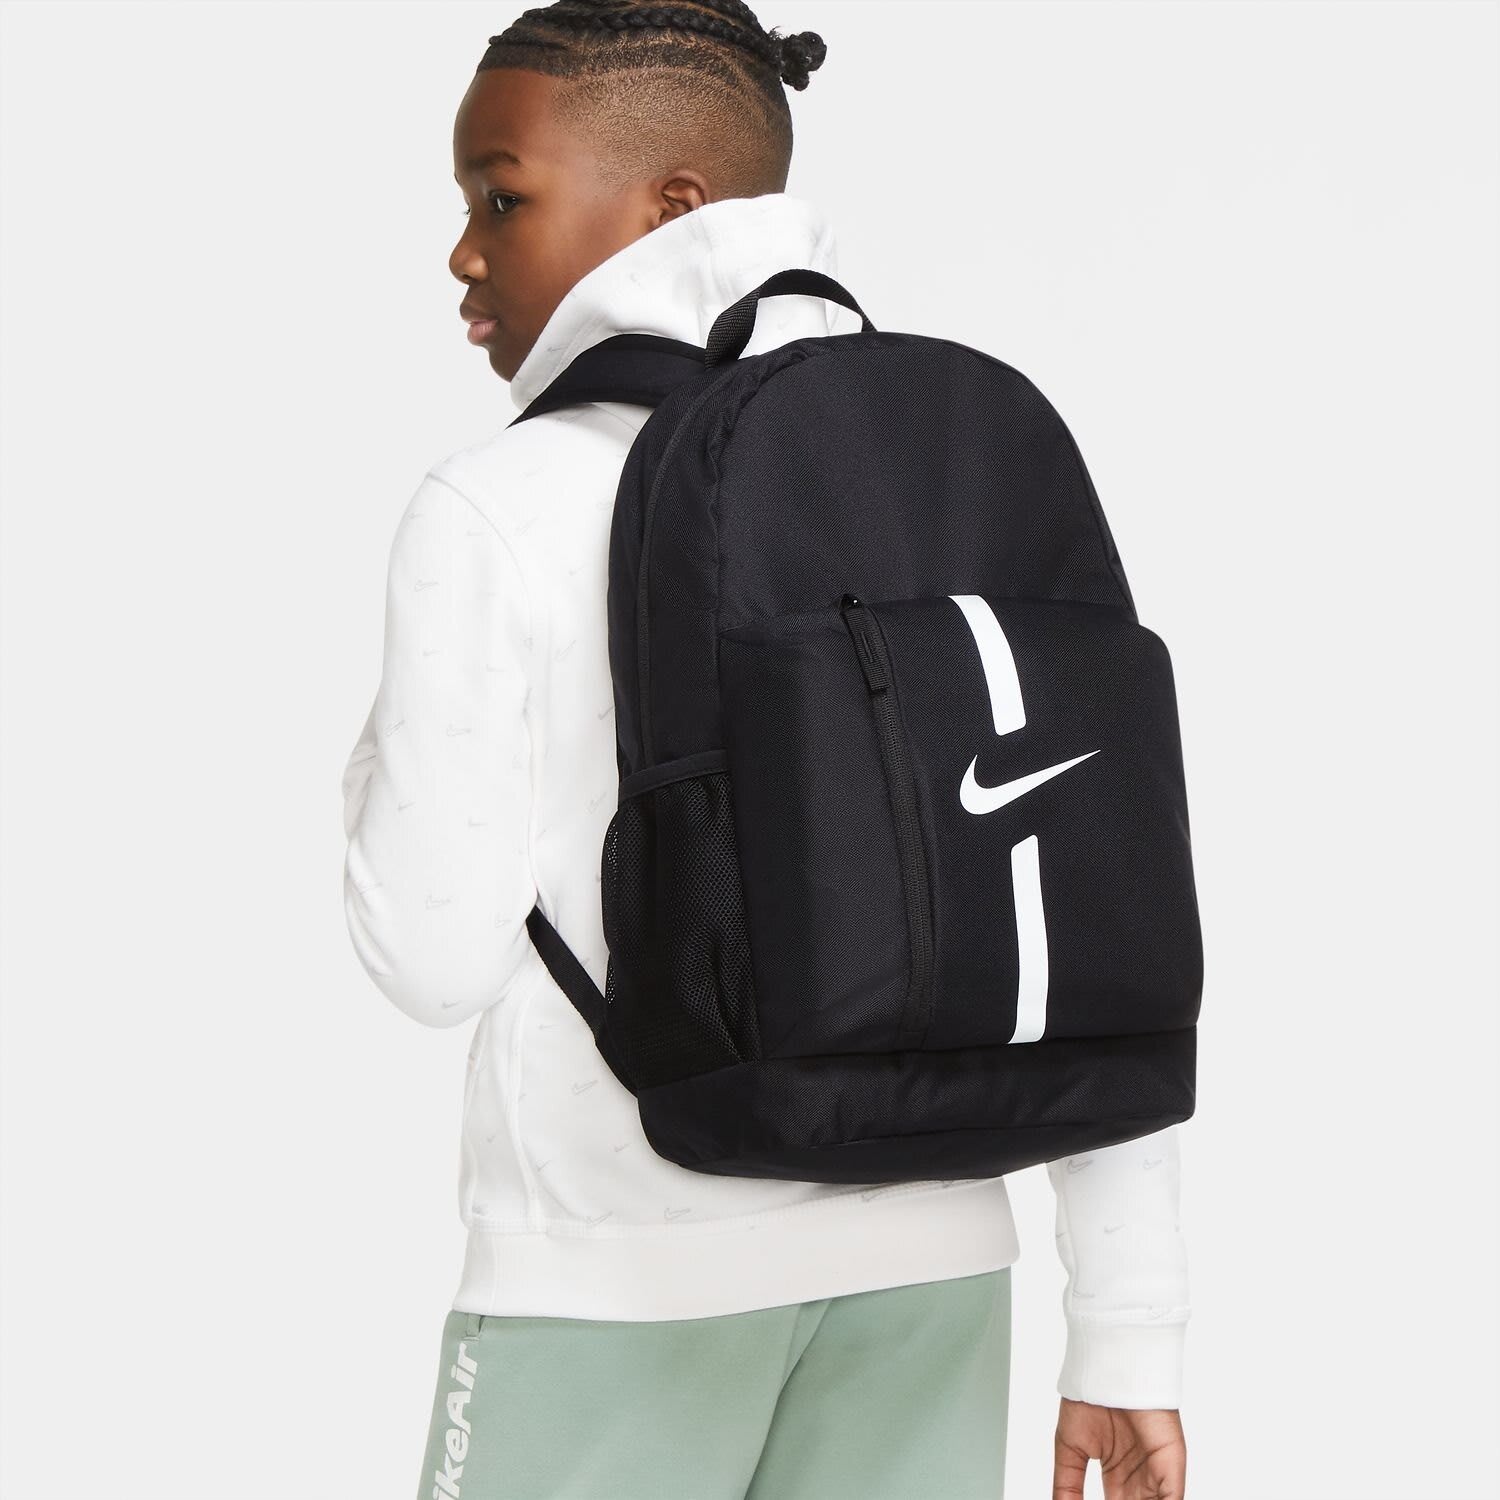 Nike Youth Academy Team Soccer Backpack | by Nike | Price: R 499,9 ...